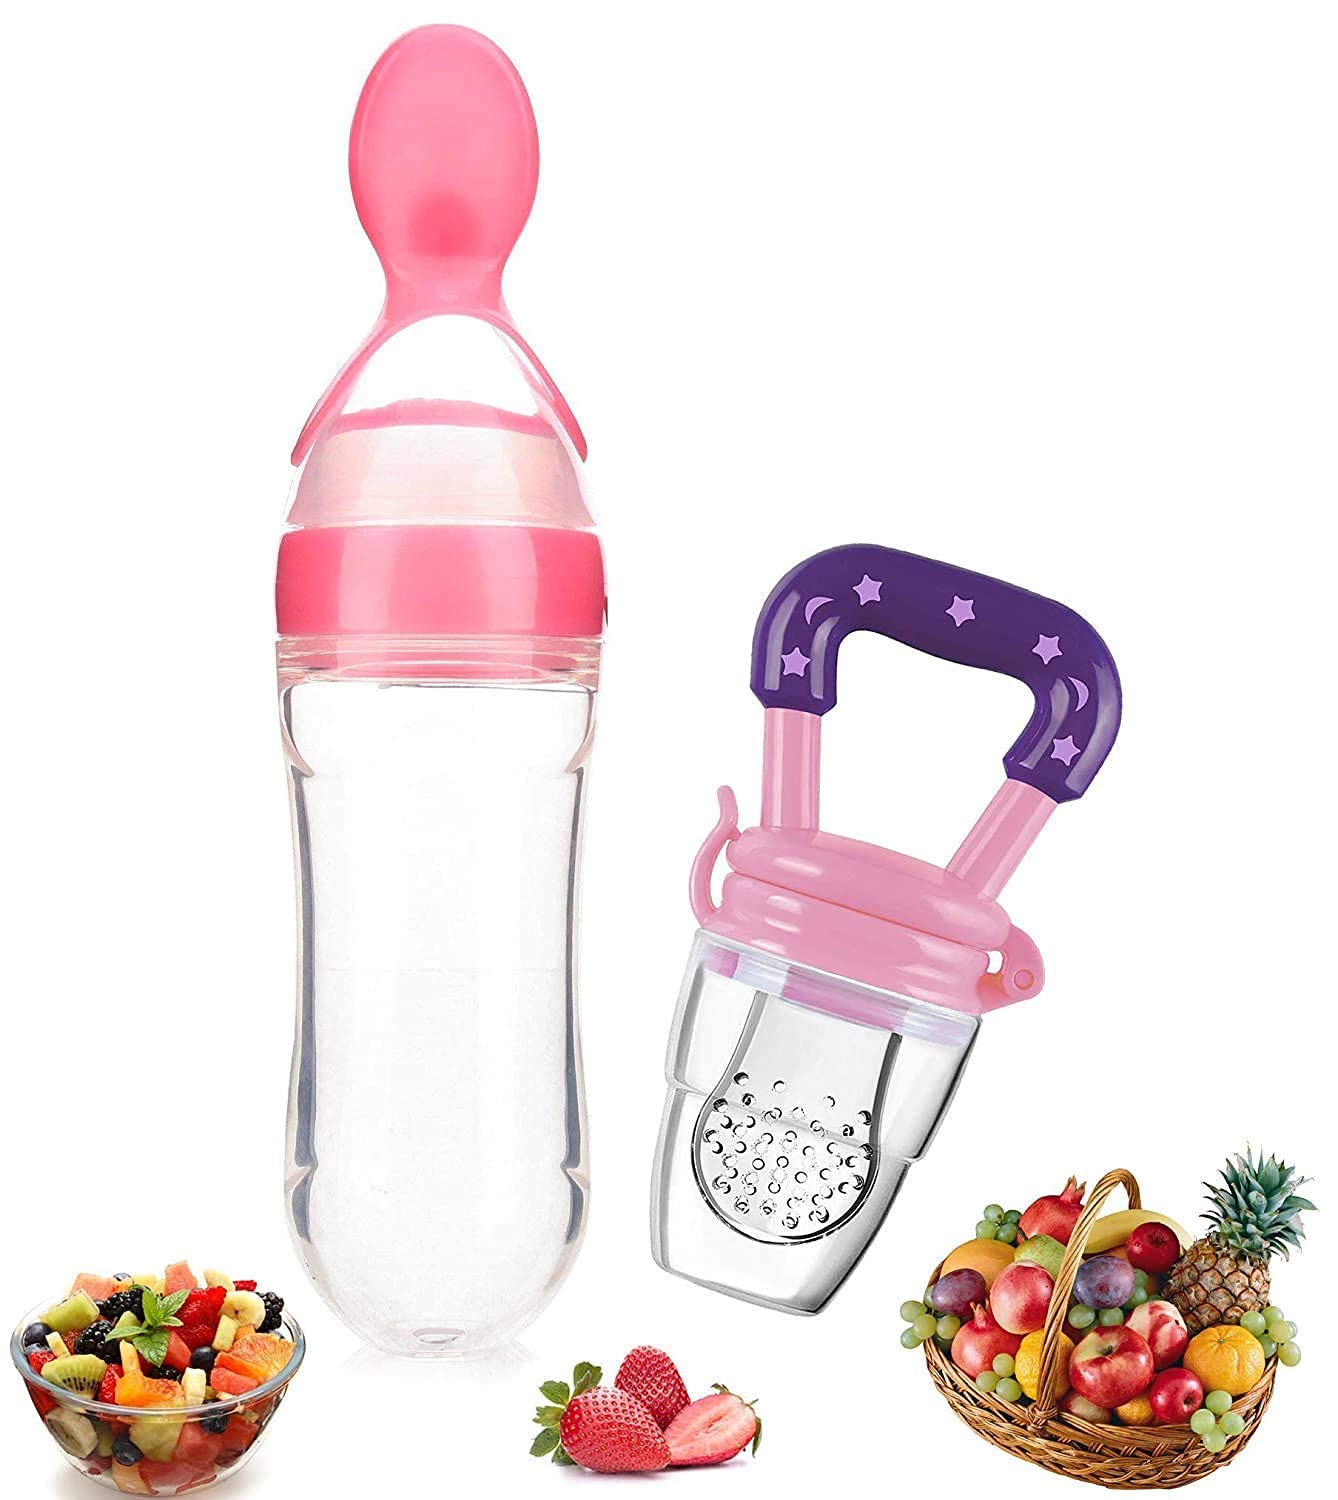 NEPEE Soft Food Grade Baby Feeding Bottle with Spoon